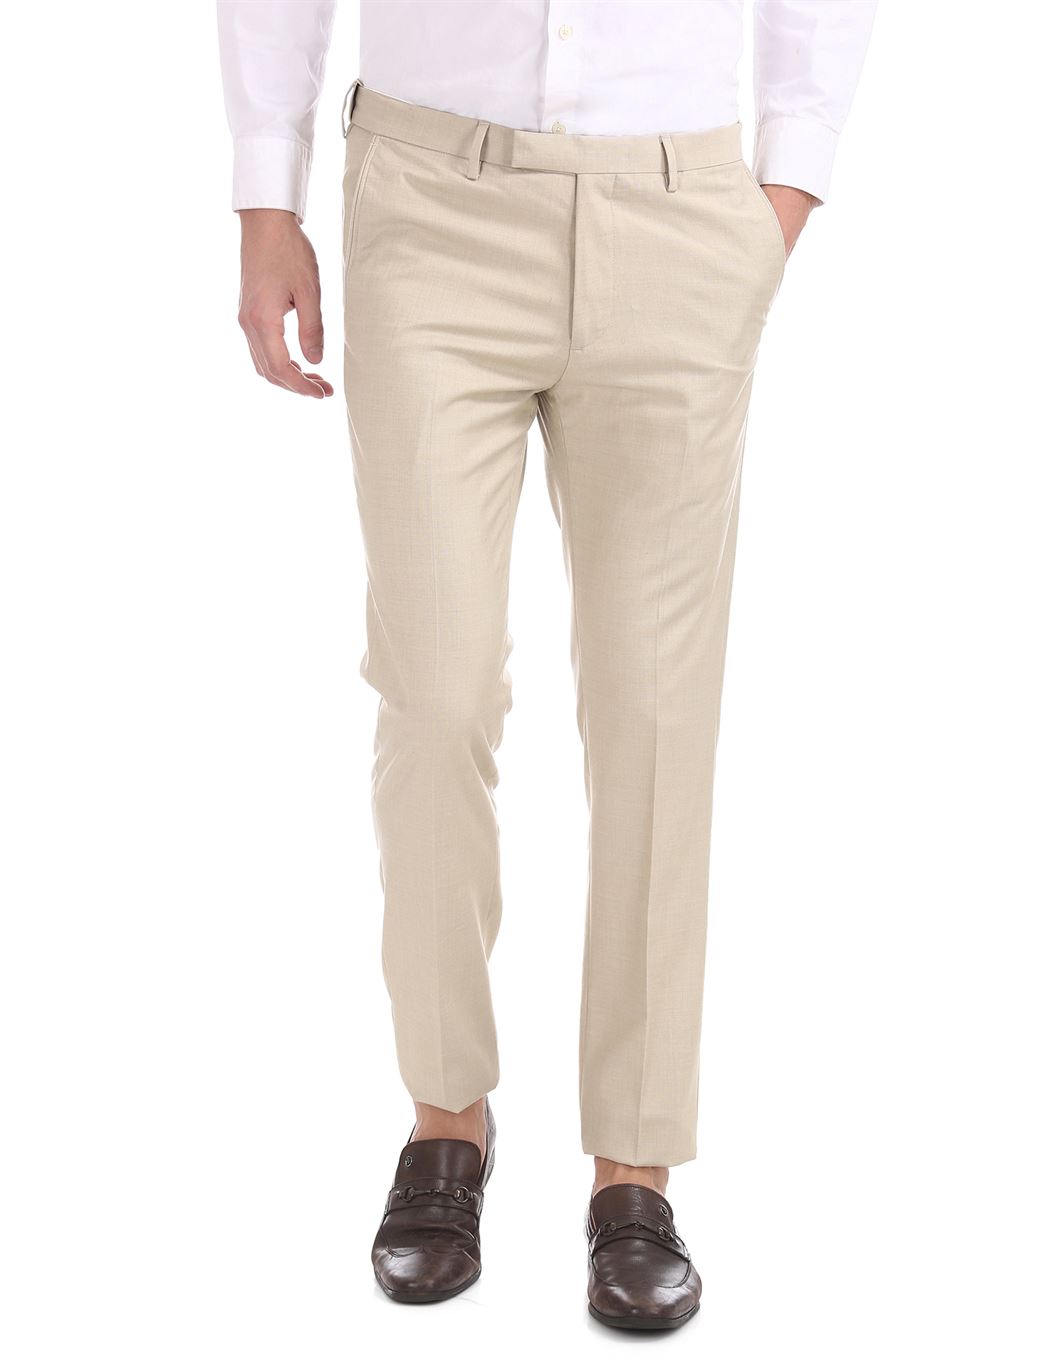 Buy Men Olive Green Mid Rise Chino Pants Online In India